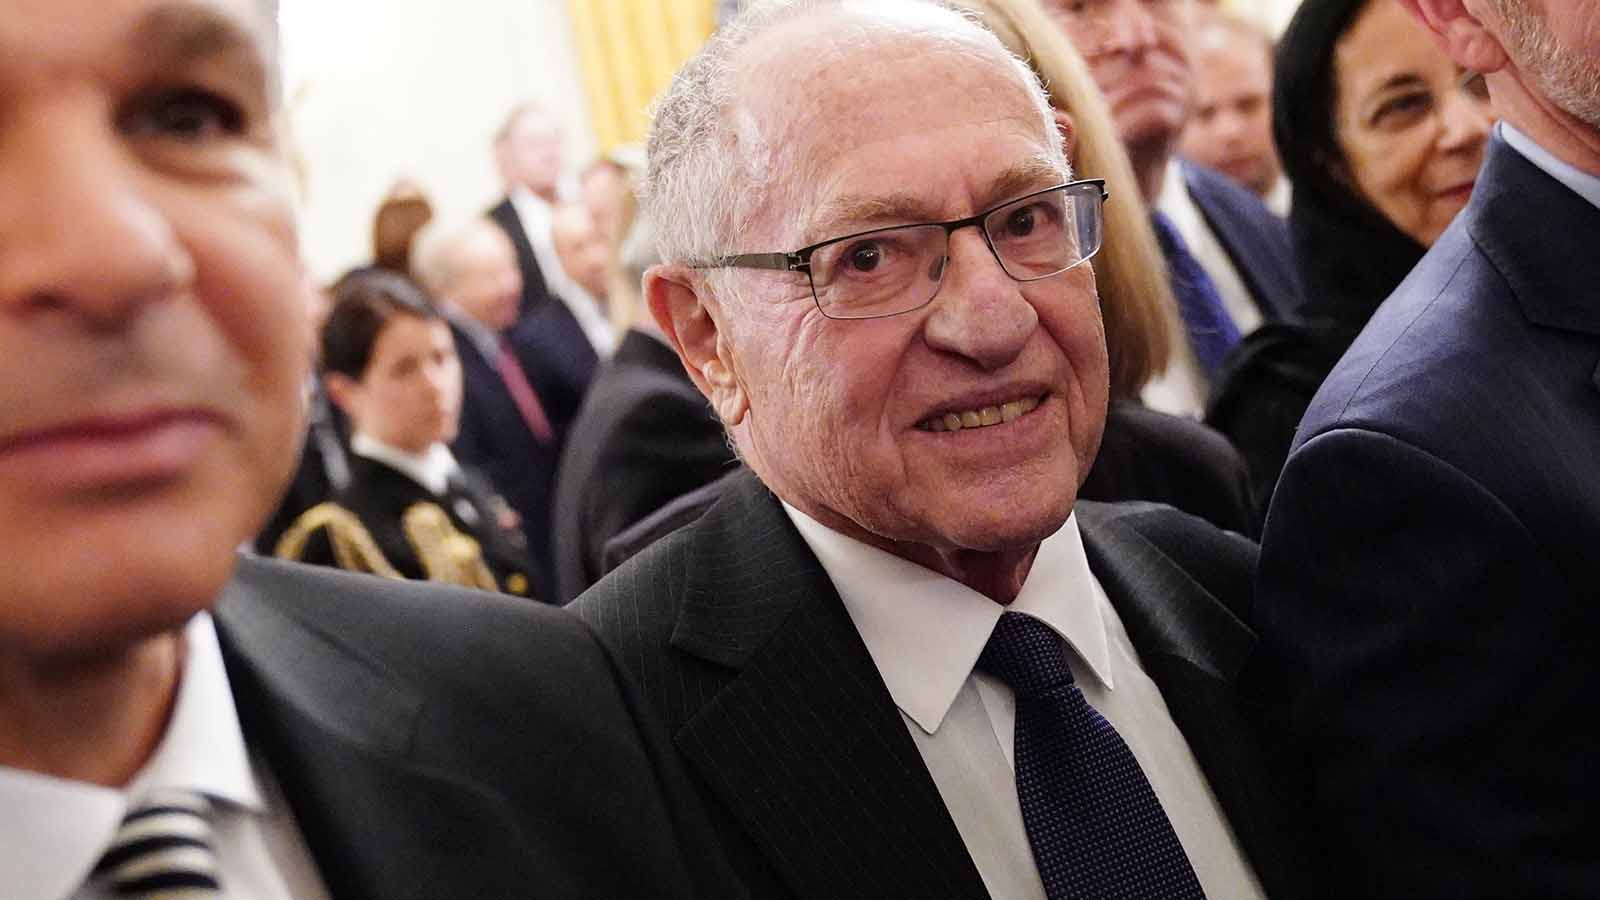 Alan Dershowitz is suing CNN over the way he was portrayed during the Trump impeachment coverage. What did they do to misportray Dershowitz?